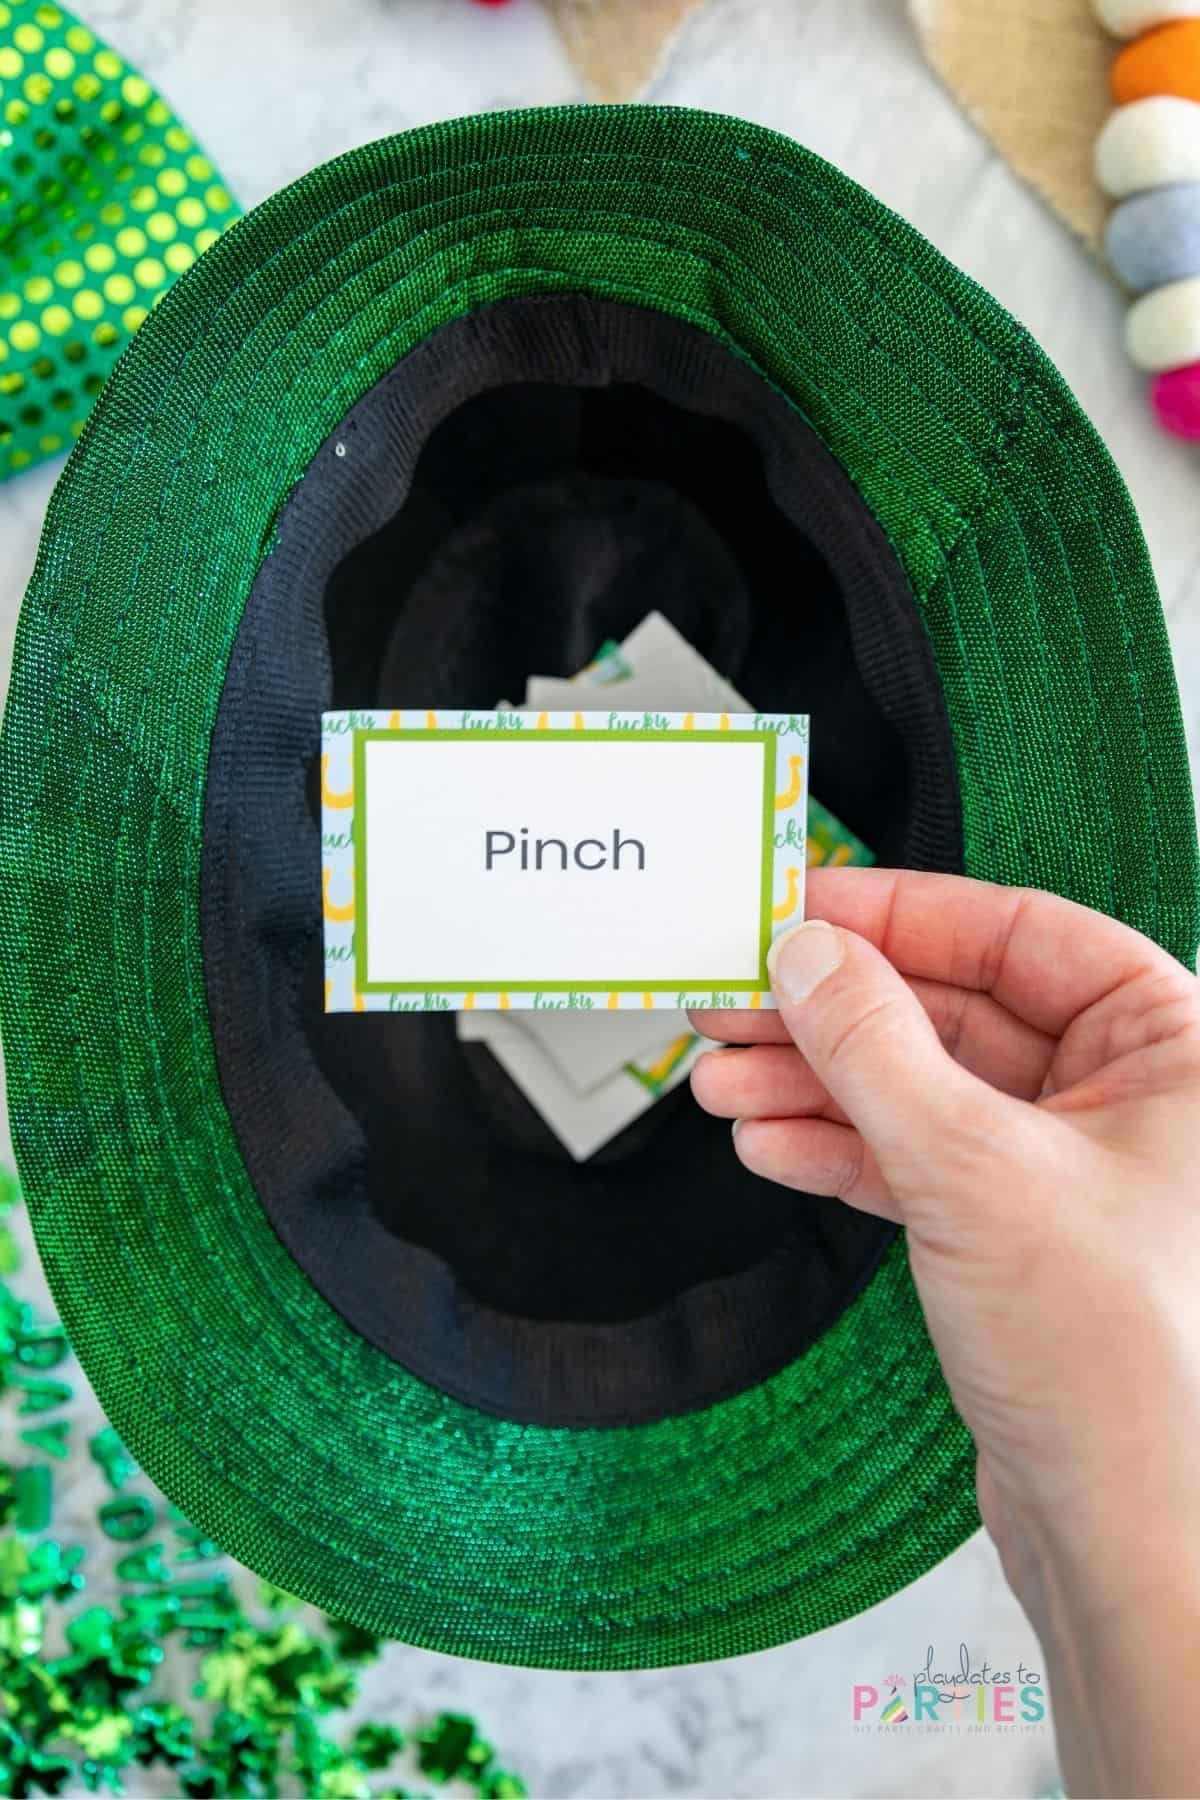 A woman's hand holding a St. Patrick's Day charades card over a green hat.